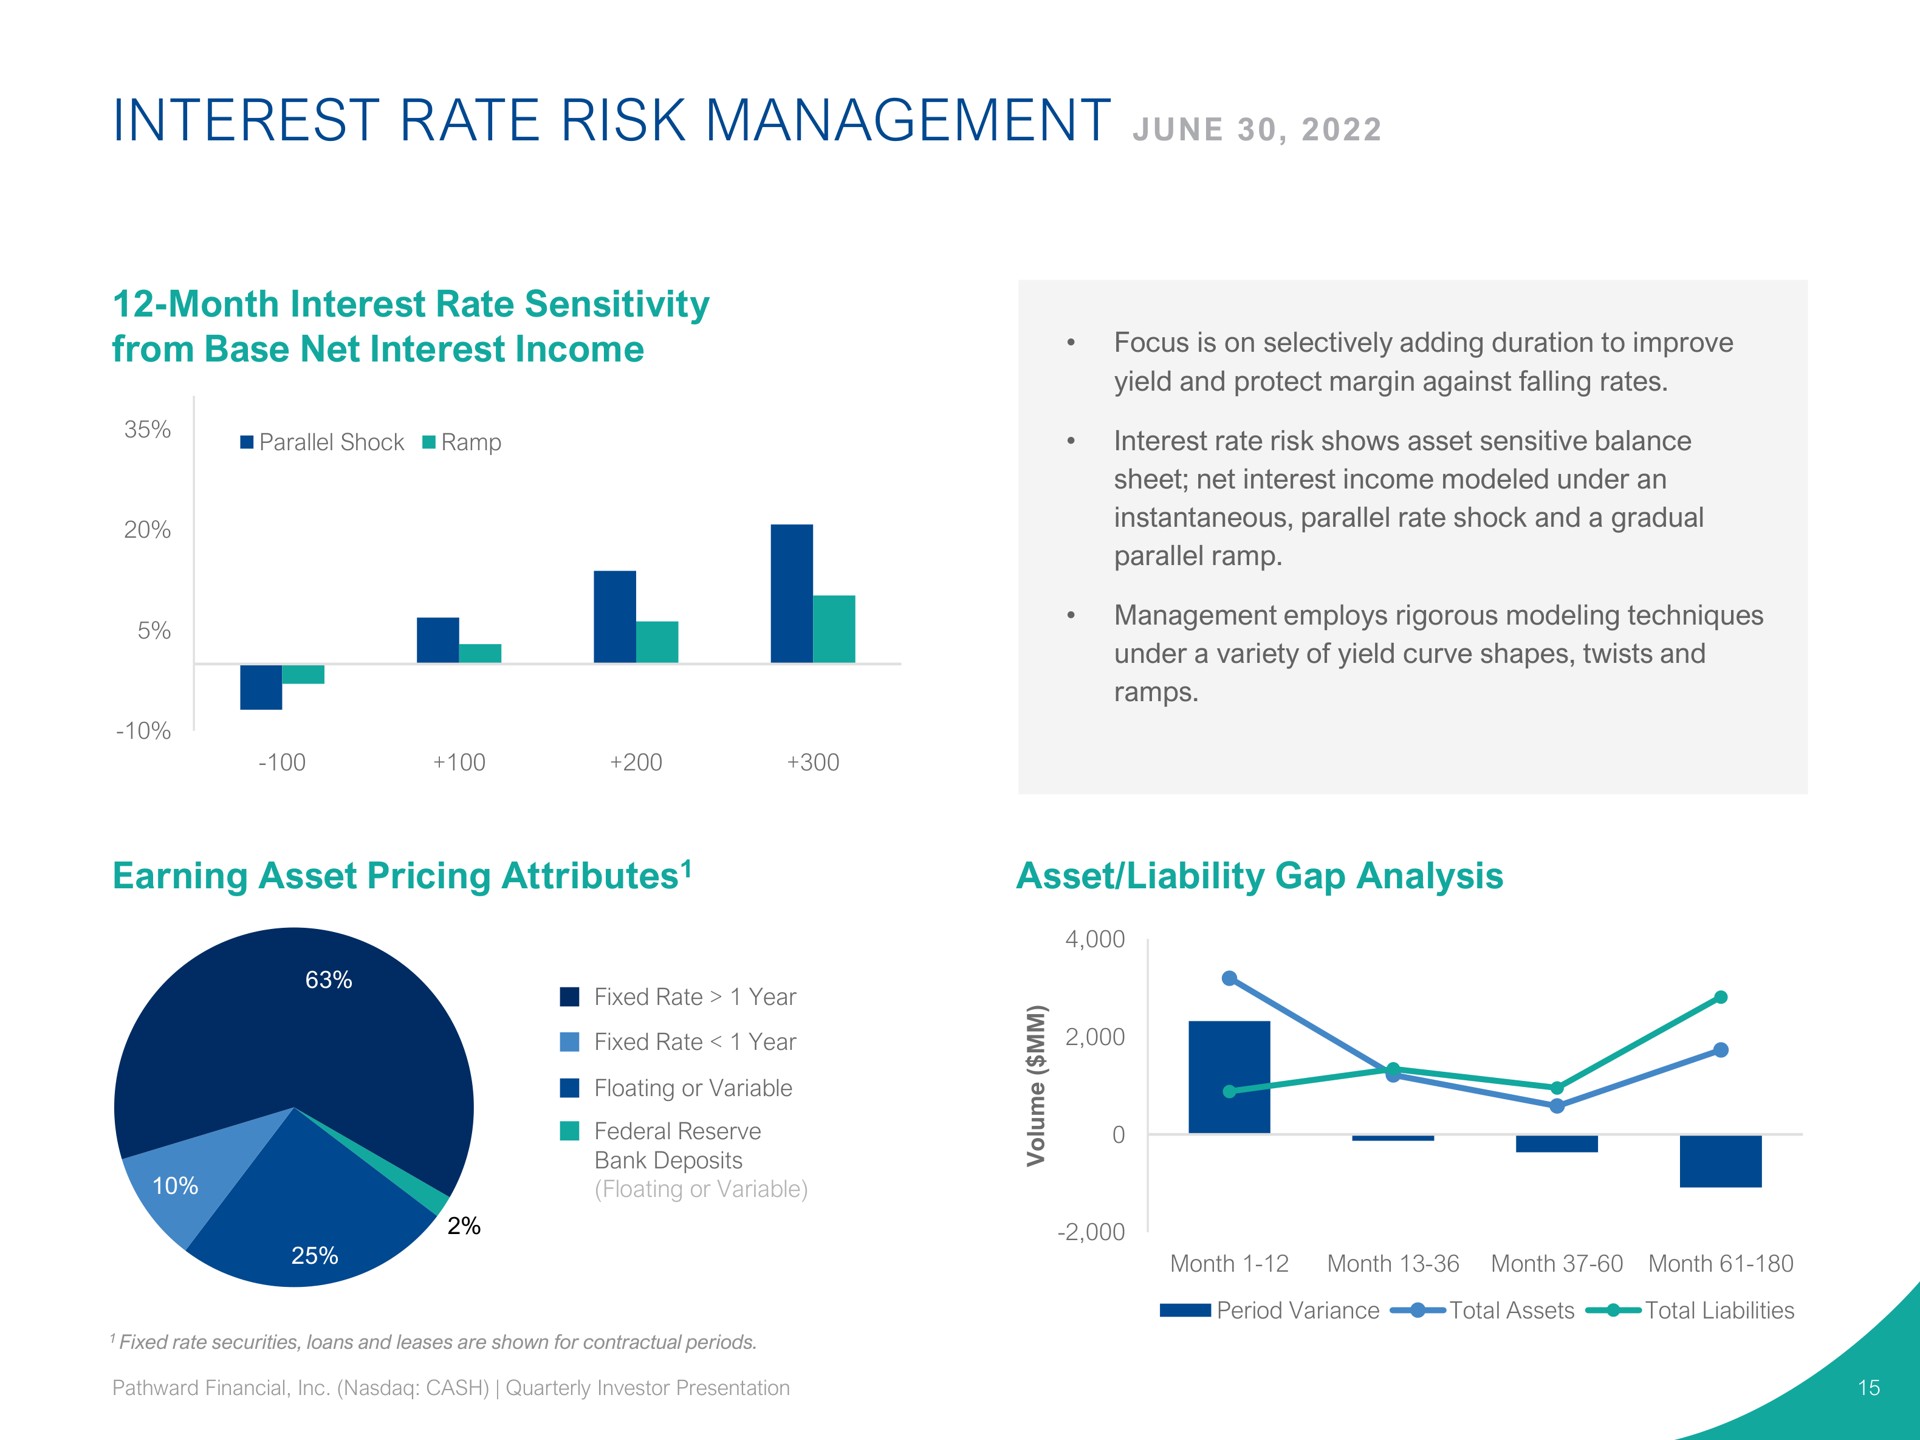 interest rate risk management june month interest rate sensitivity from base net interest income earning asset pricing attributes asset liability gap analysis attributes | Pathward Financial